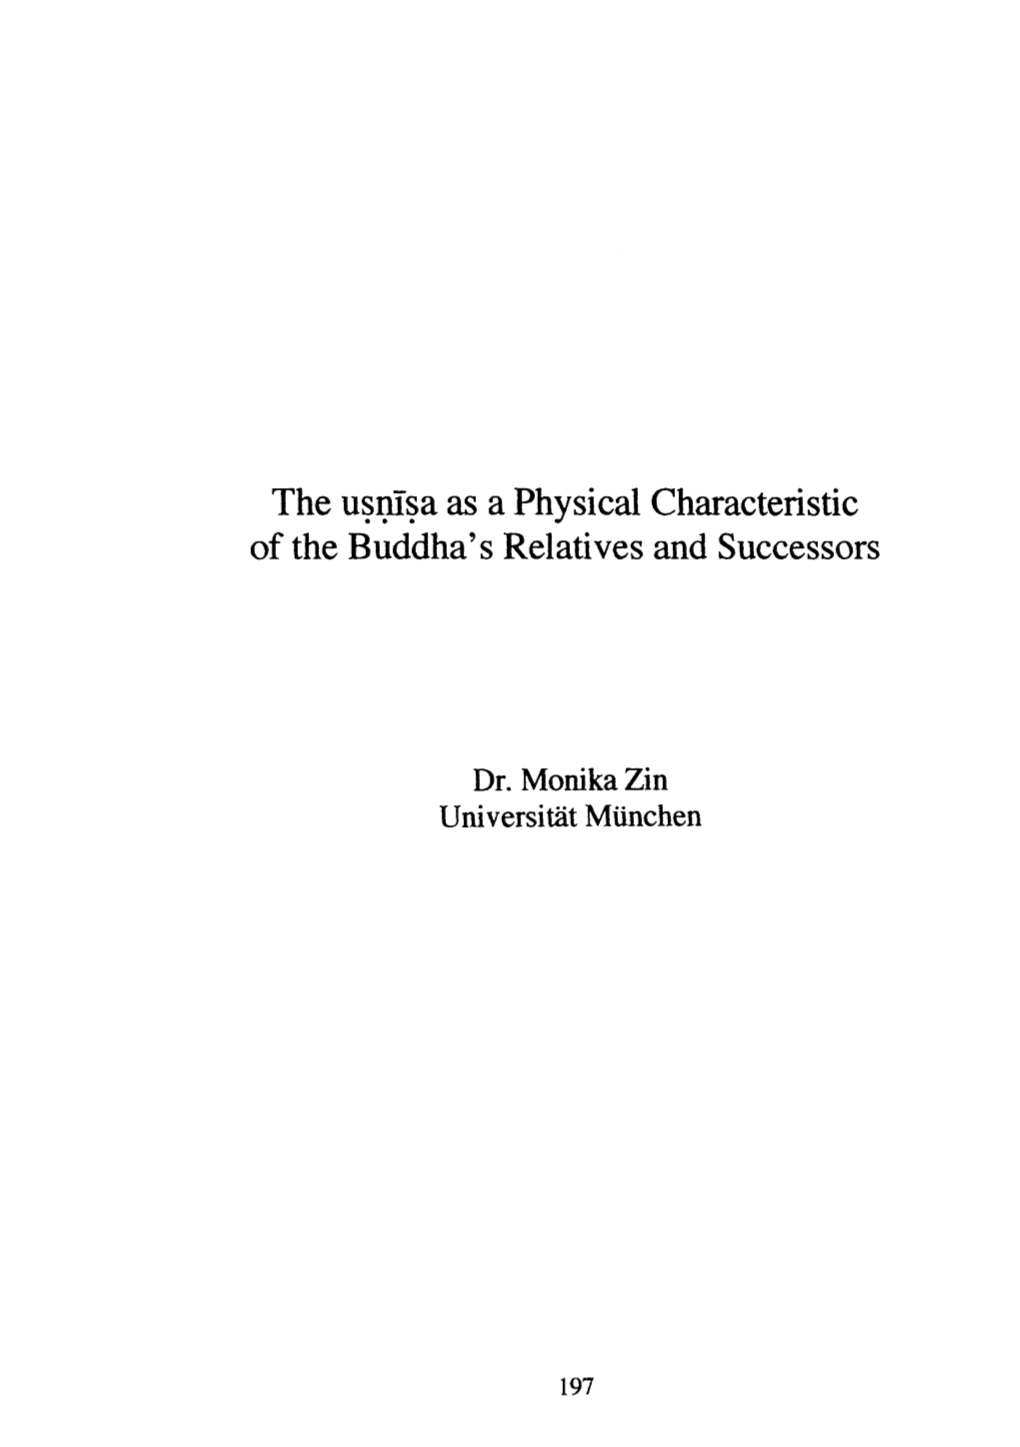 The Usnisa As a Physical Characteristic of the Buddha's Relatives and Successors